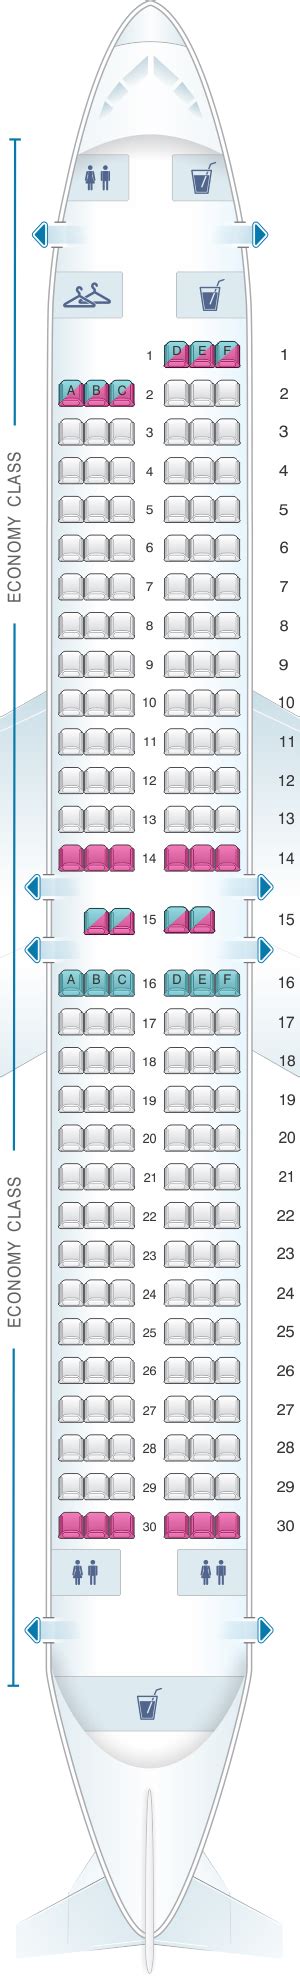 boeing 737 max 8 southwest seating map